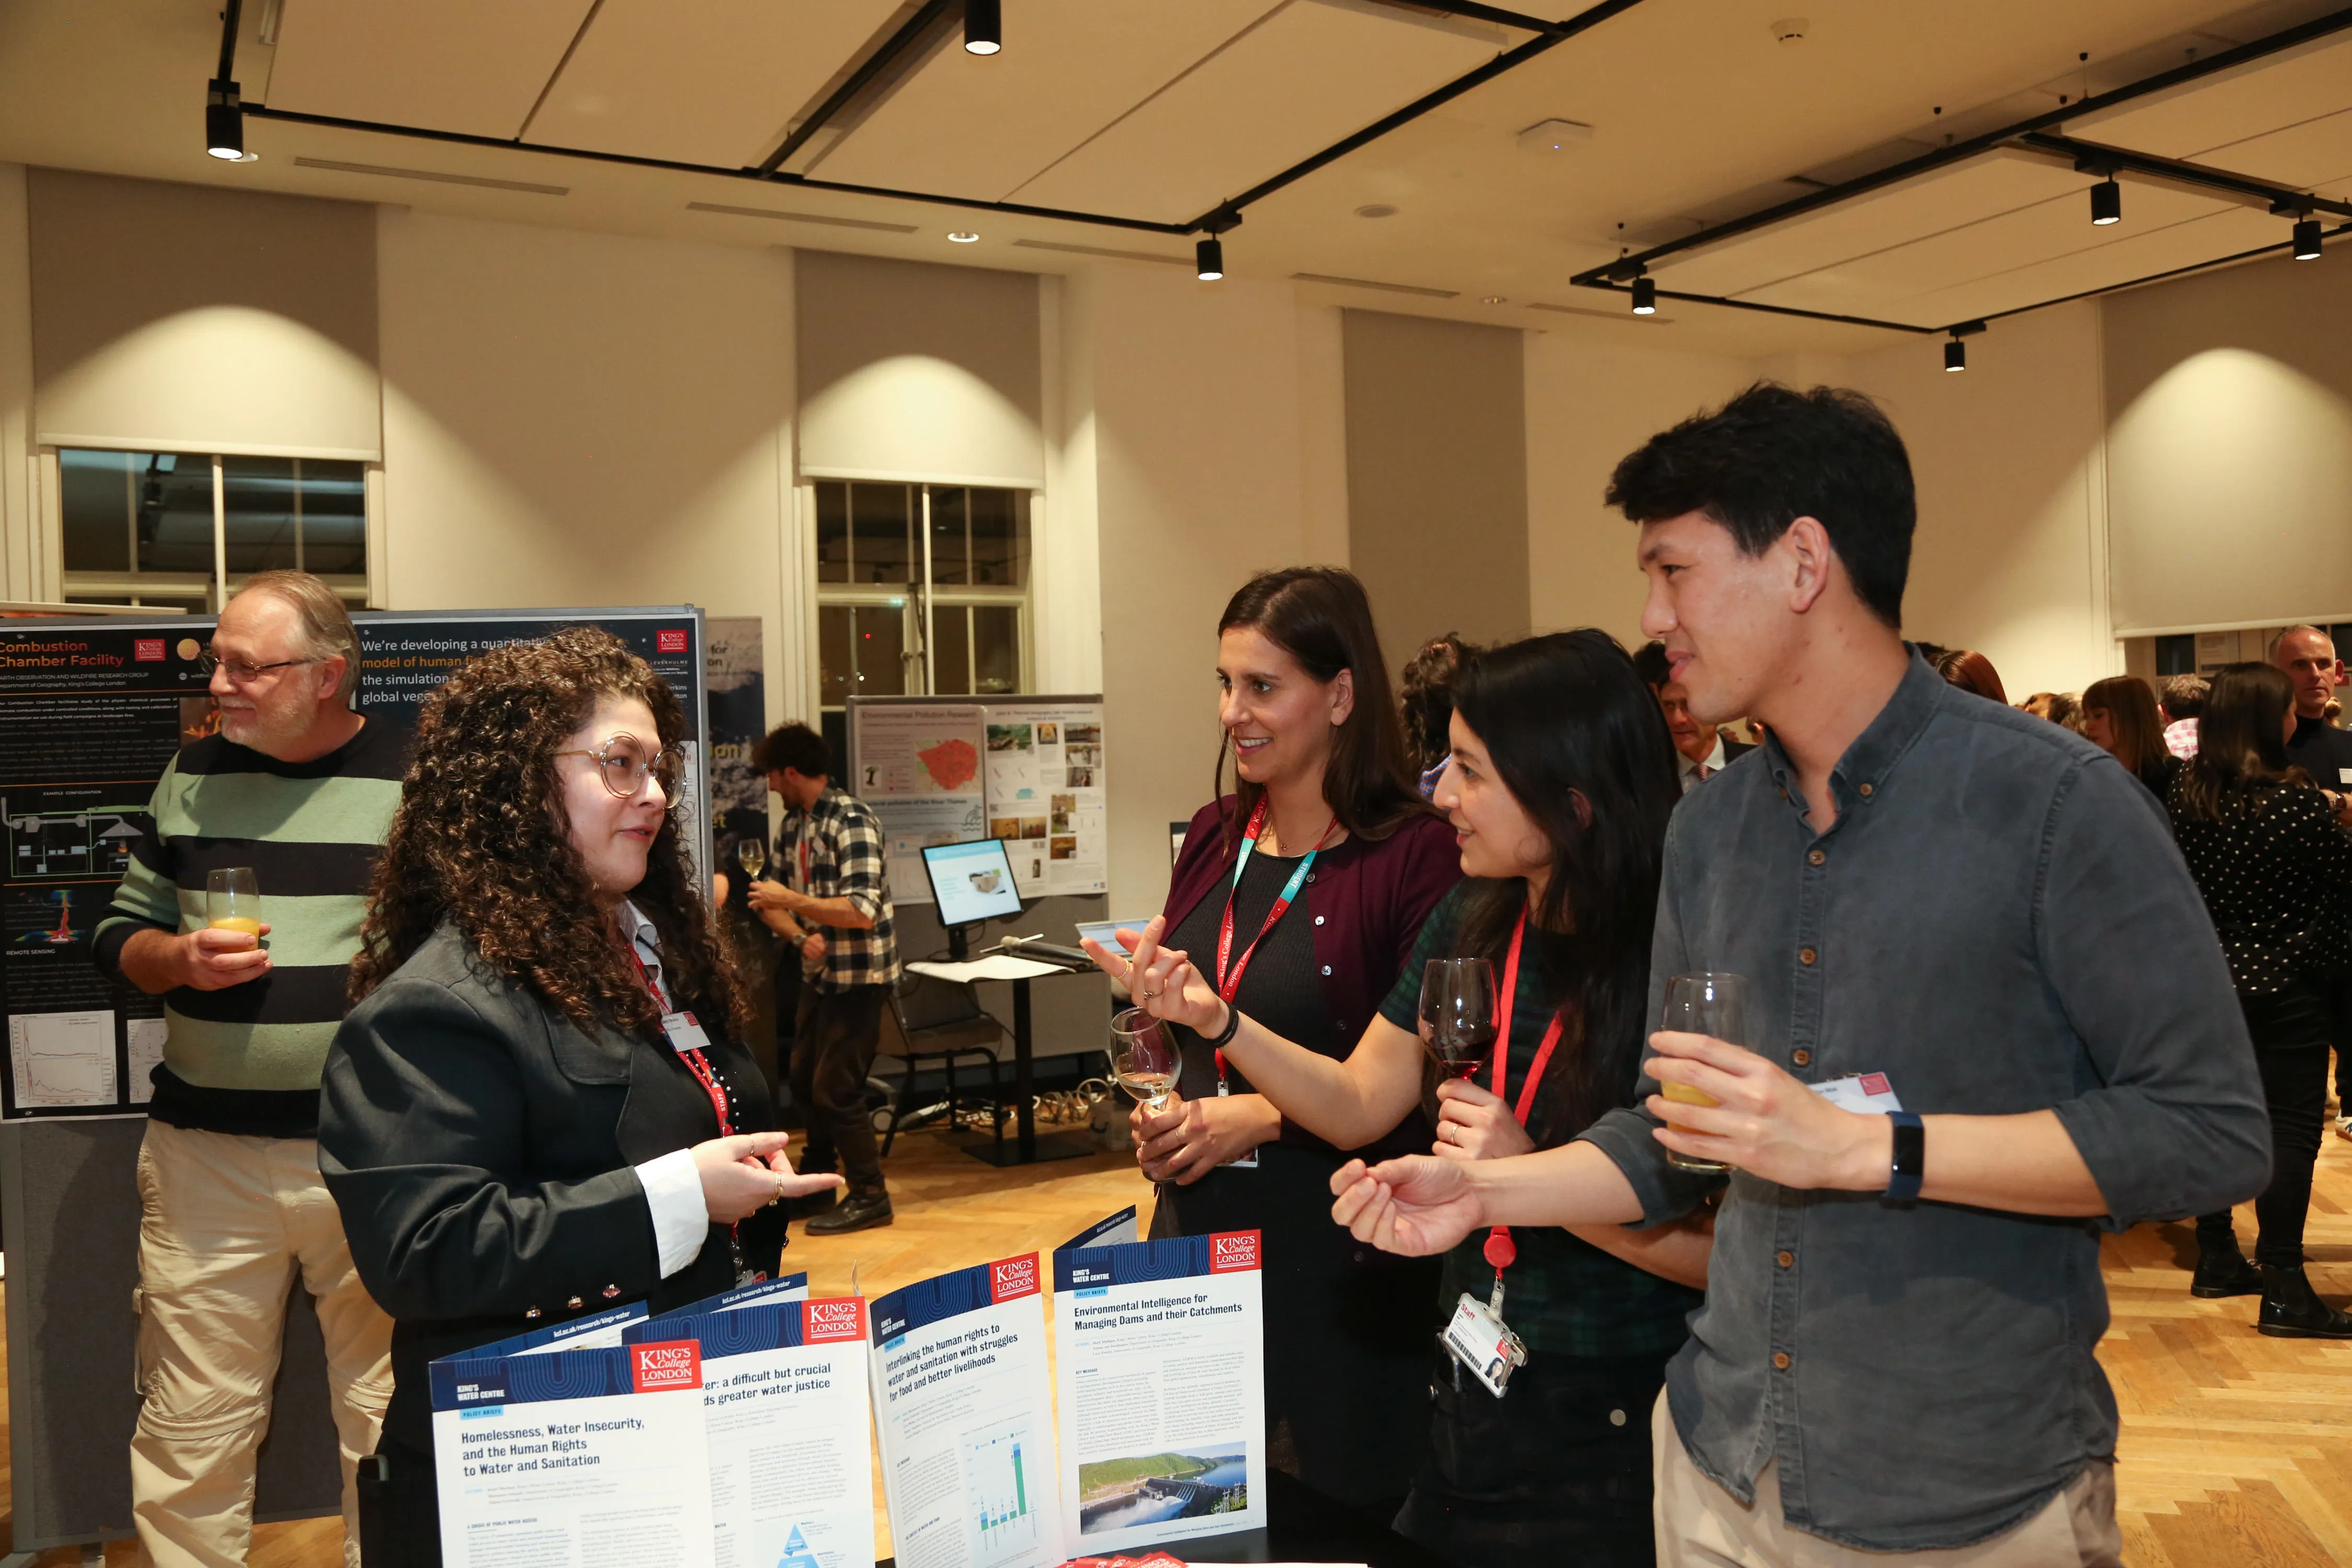 Students with King's Water policy briefs